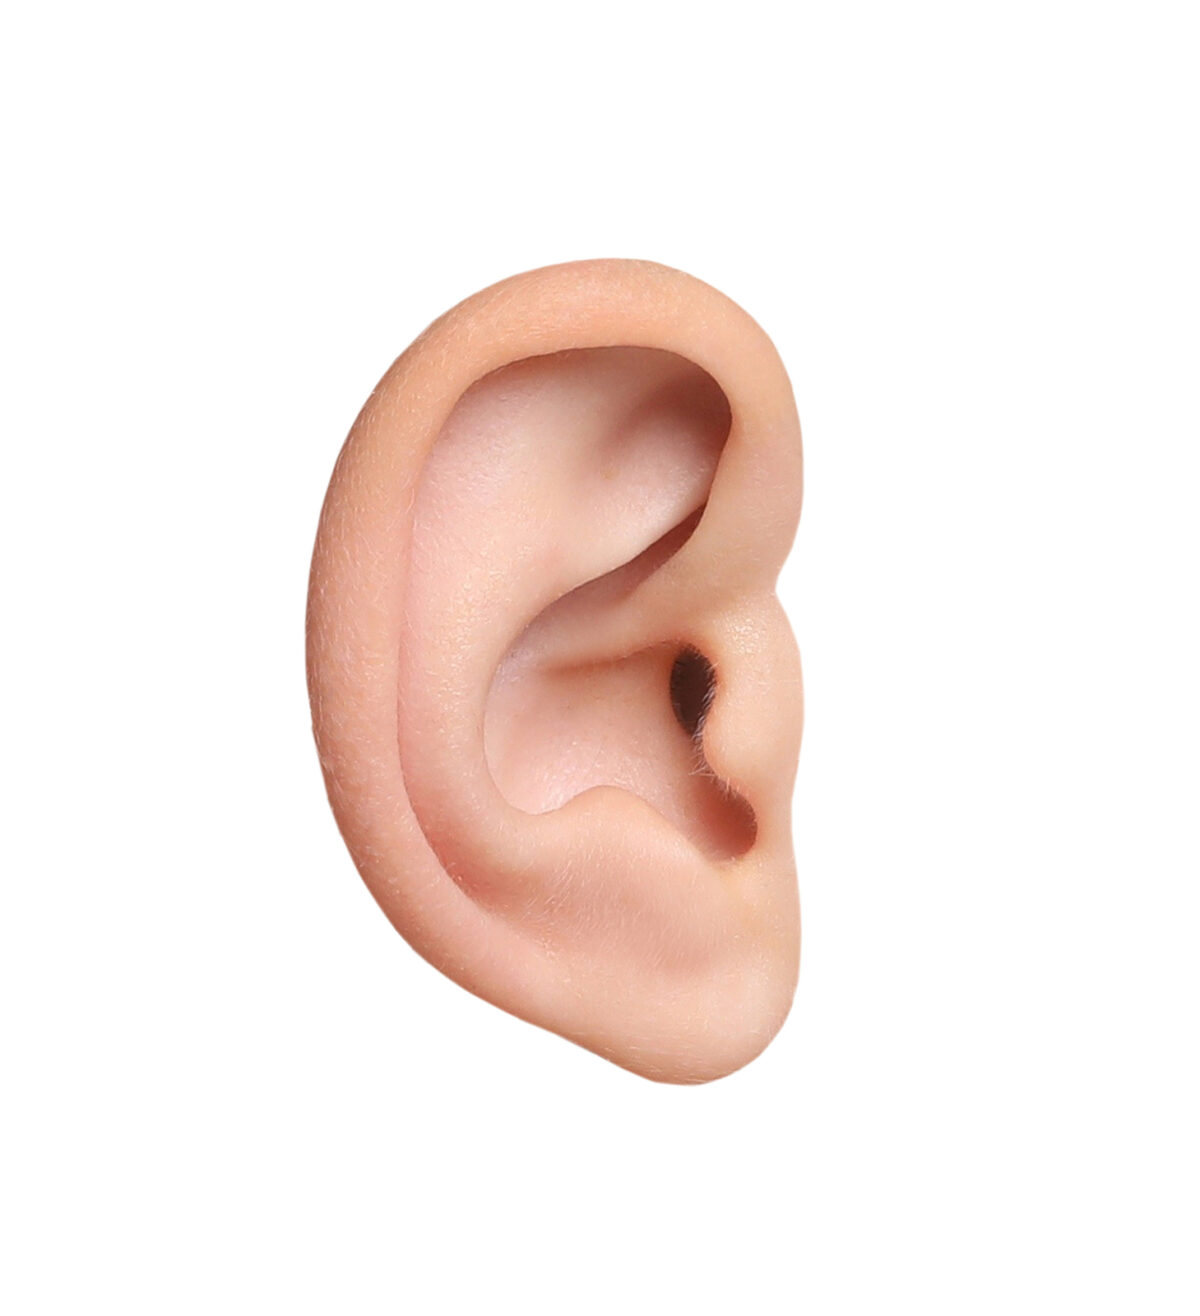 Image of human ear on white background